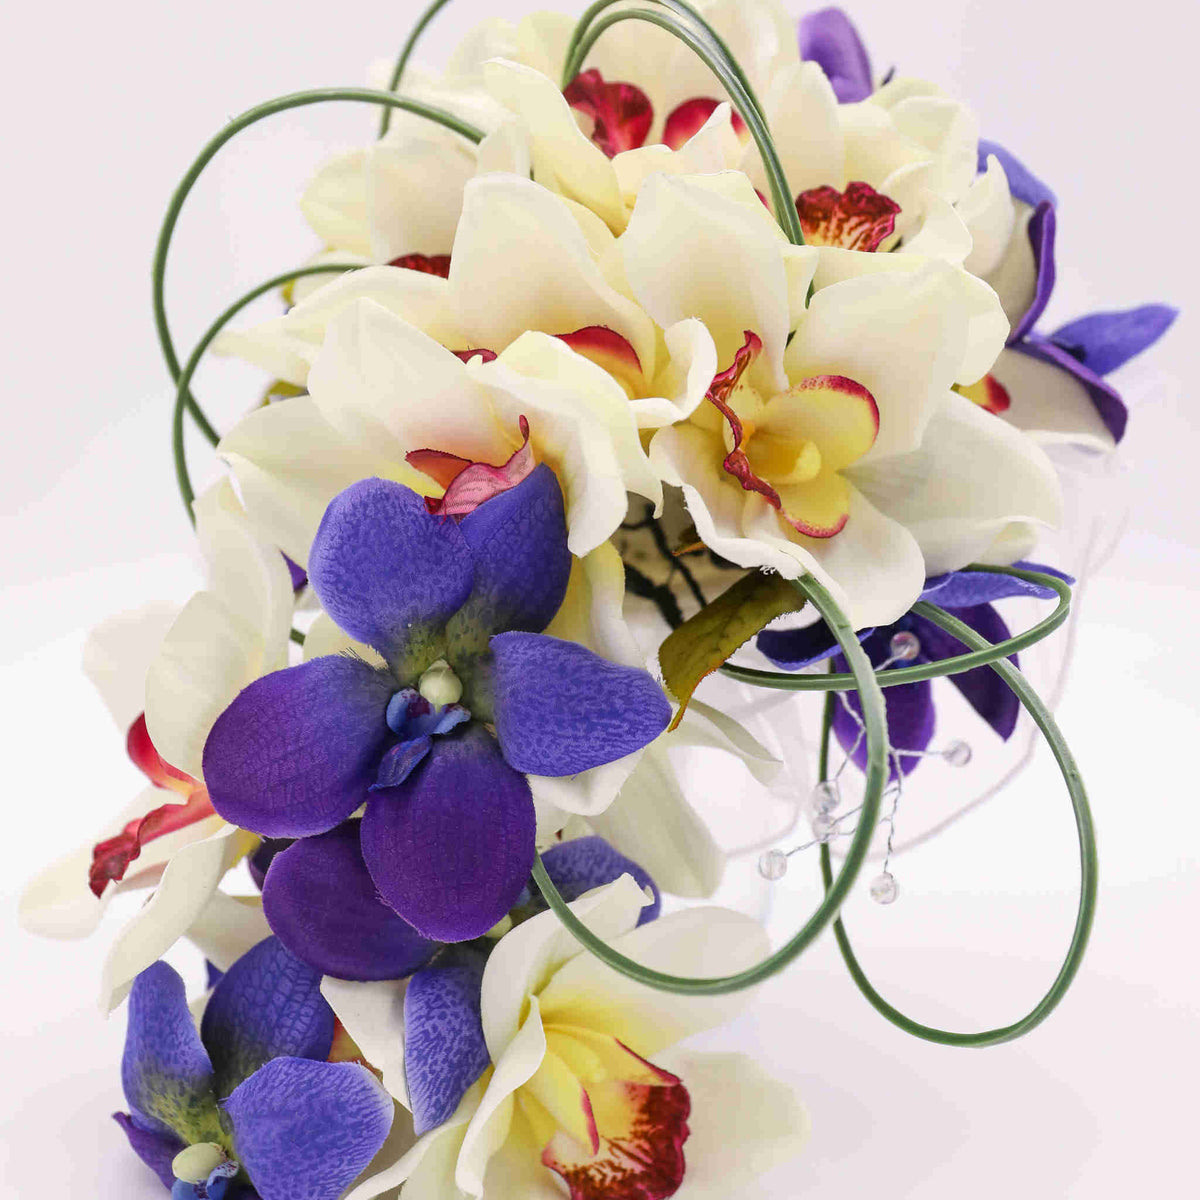 Created with silk orchids and various accent tropical flowers, greenery and clear sparkle stems, the bouquet sits atop a handle wrapped in satin to be both beautiful and comfortable.